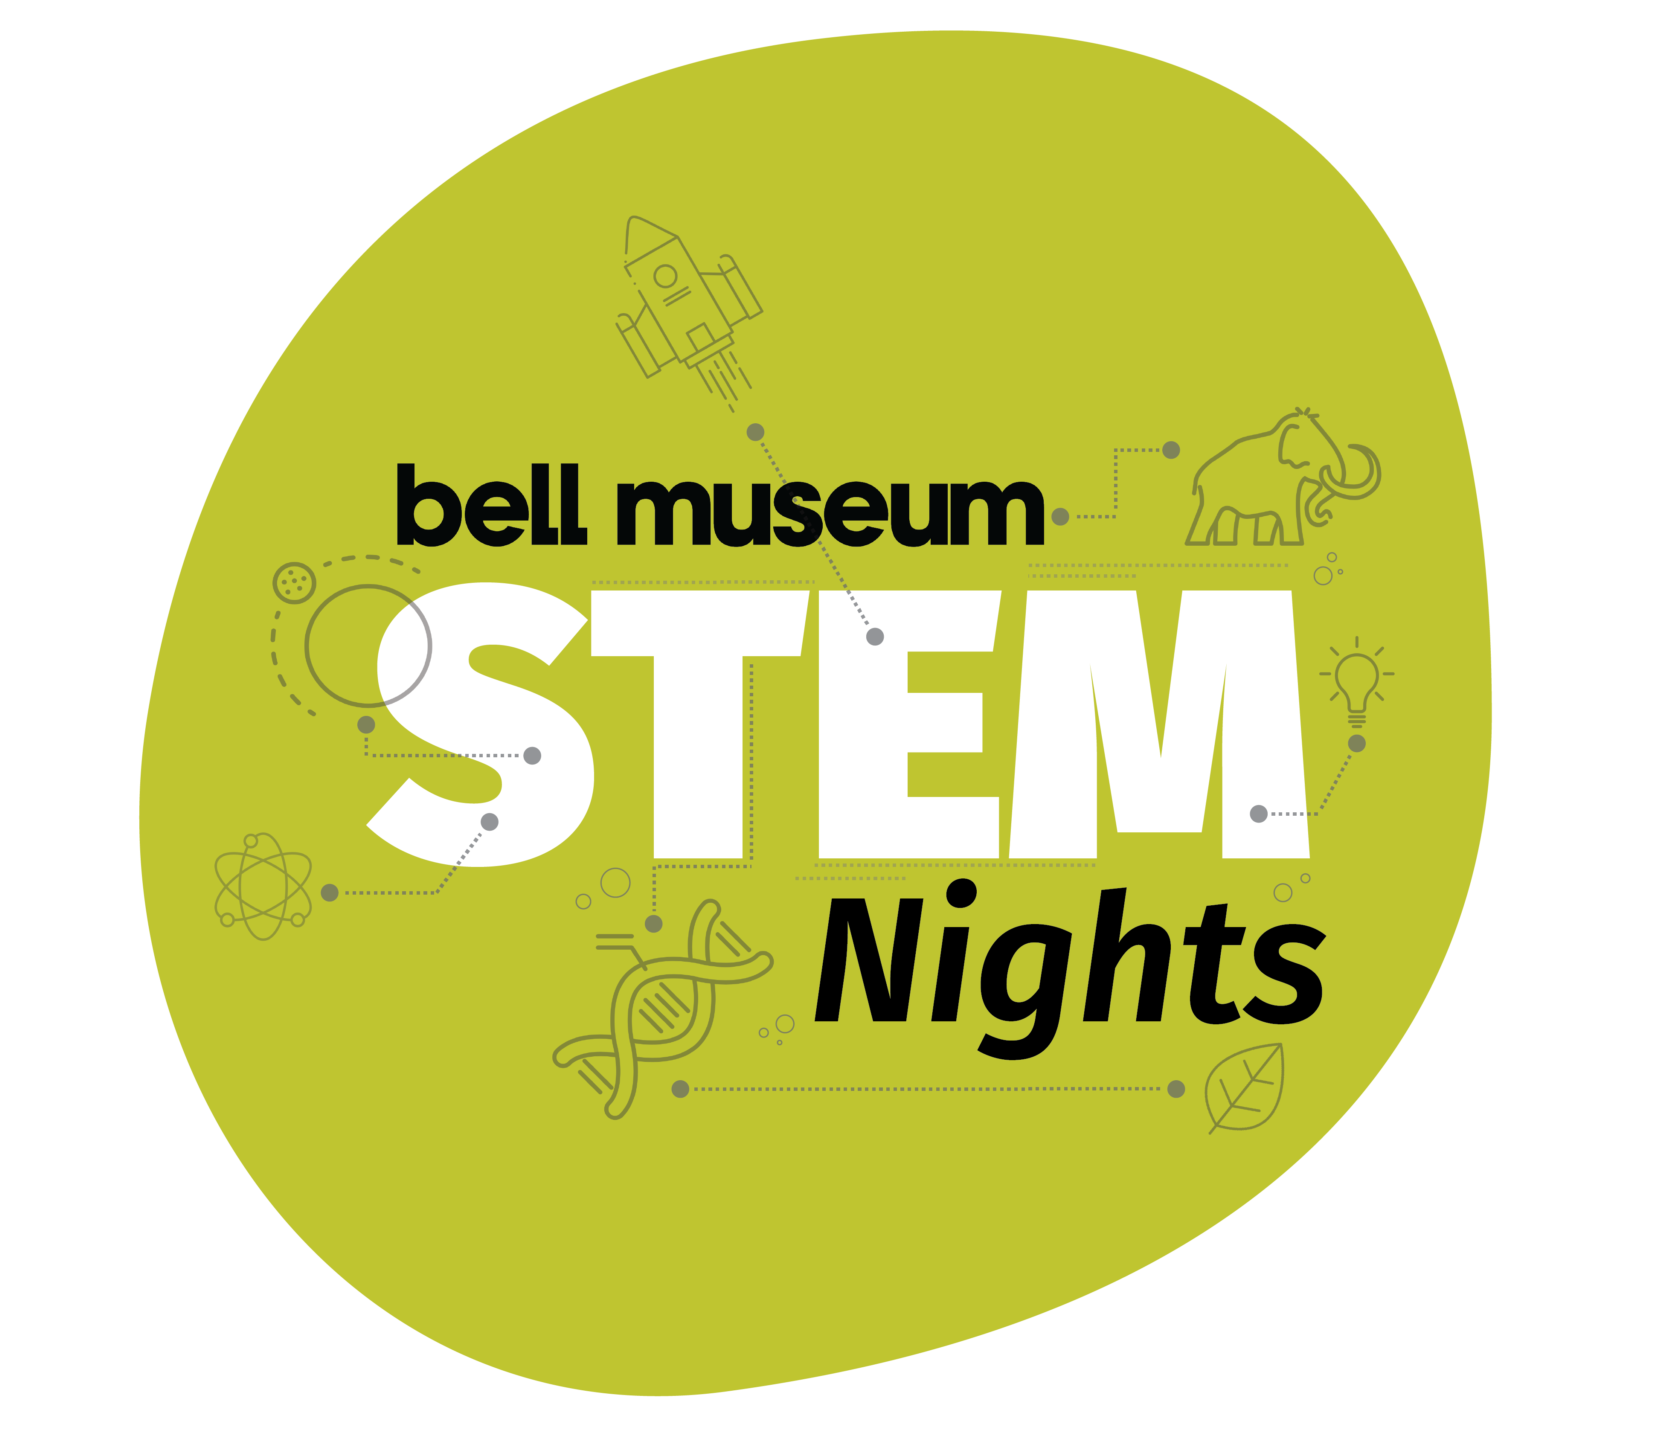 A green circle with the text, "Bell Museum STEM Nights" surrounded by icons of science related objects